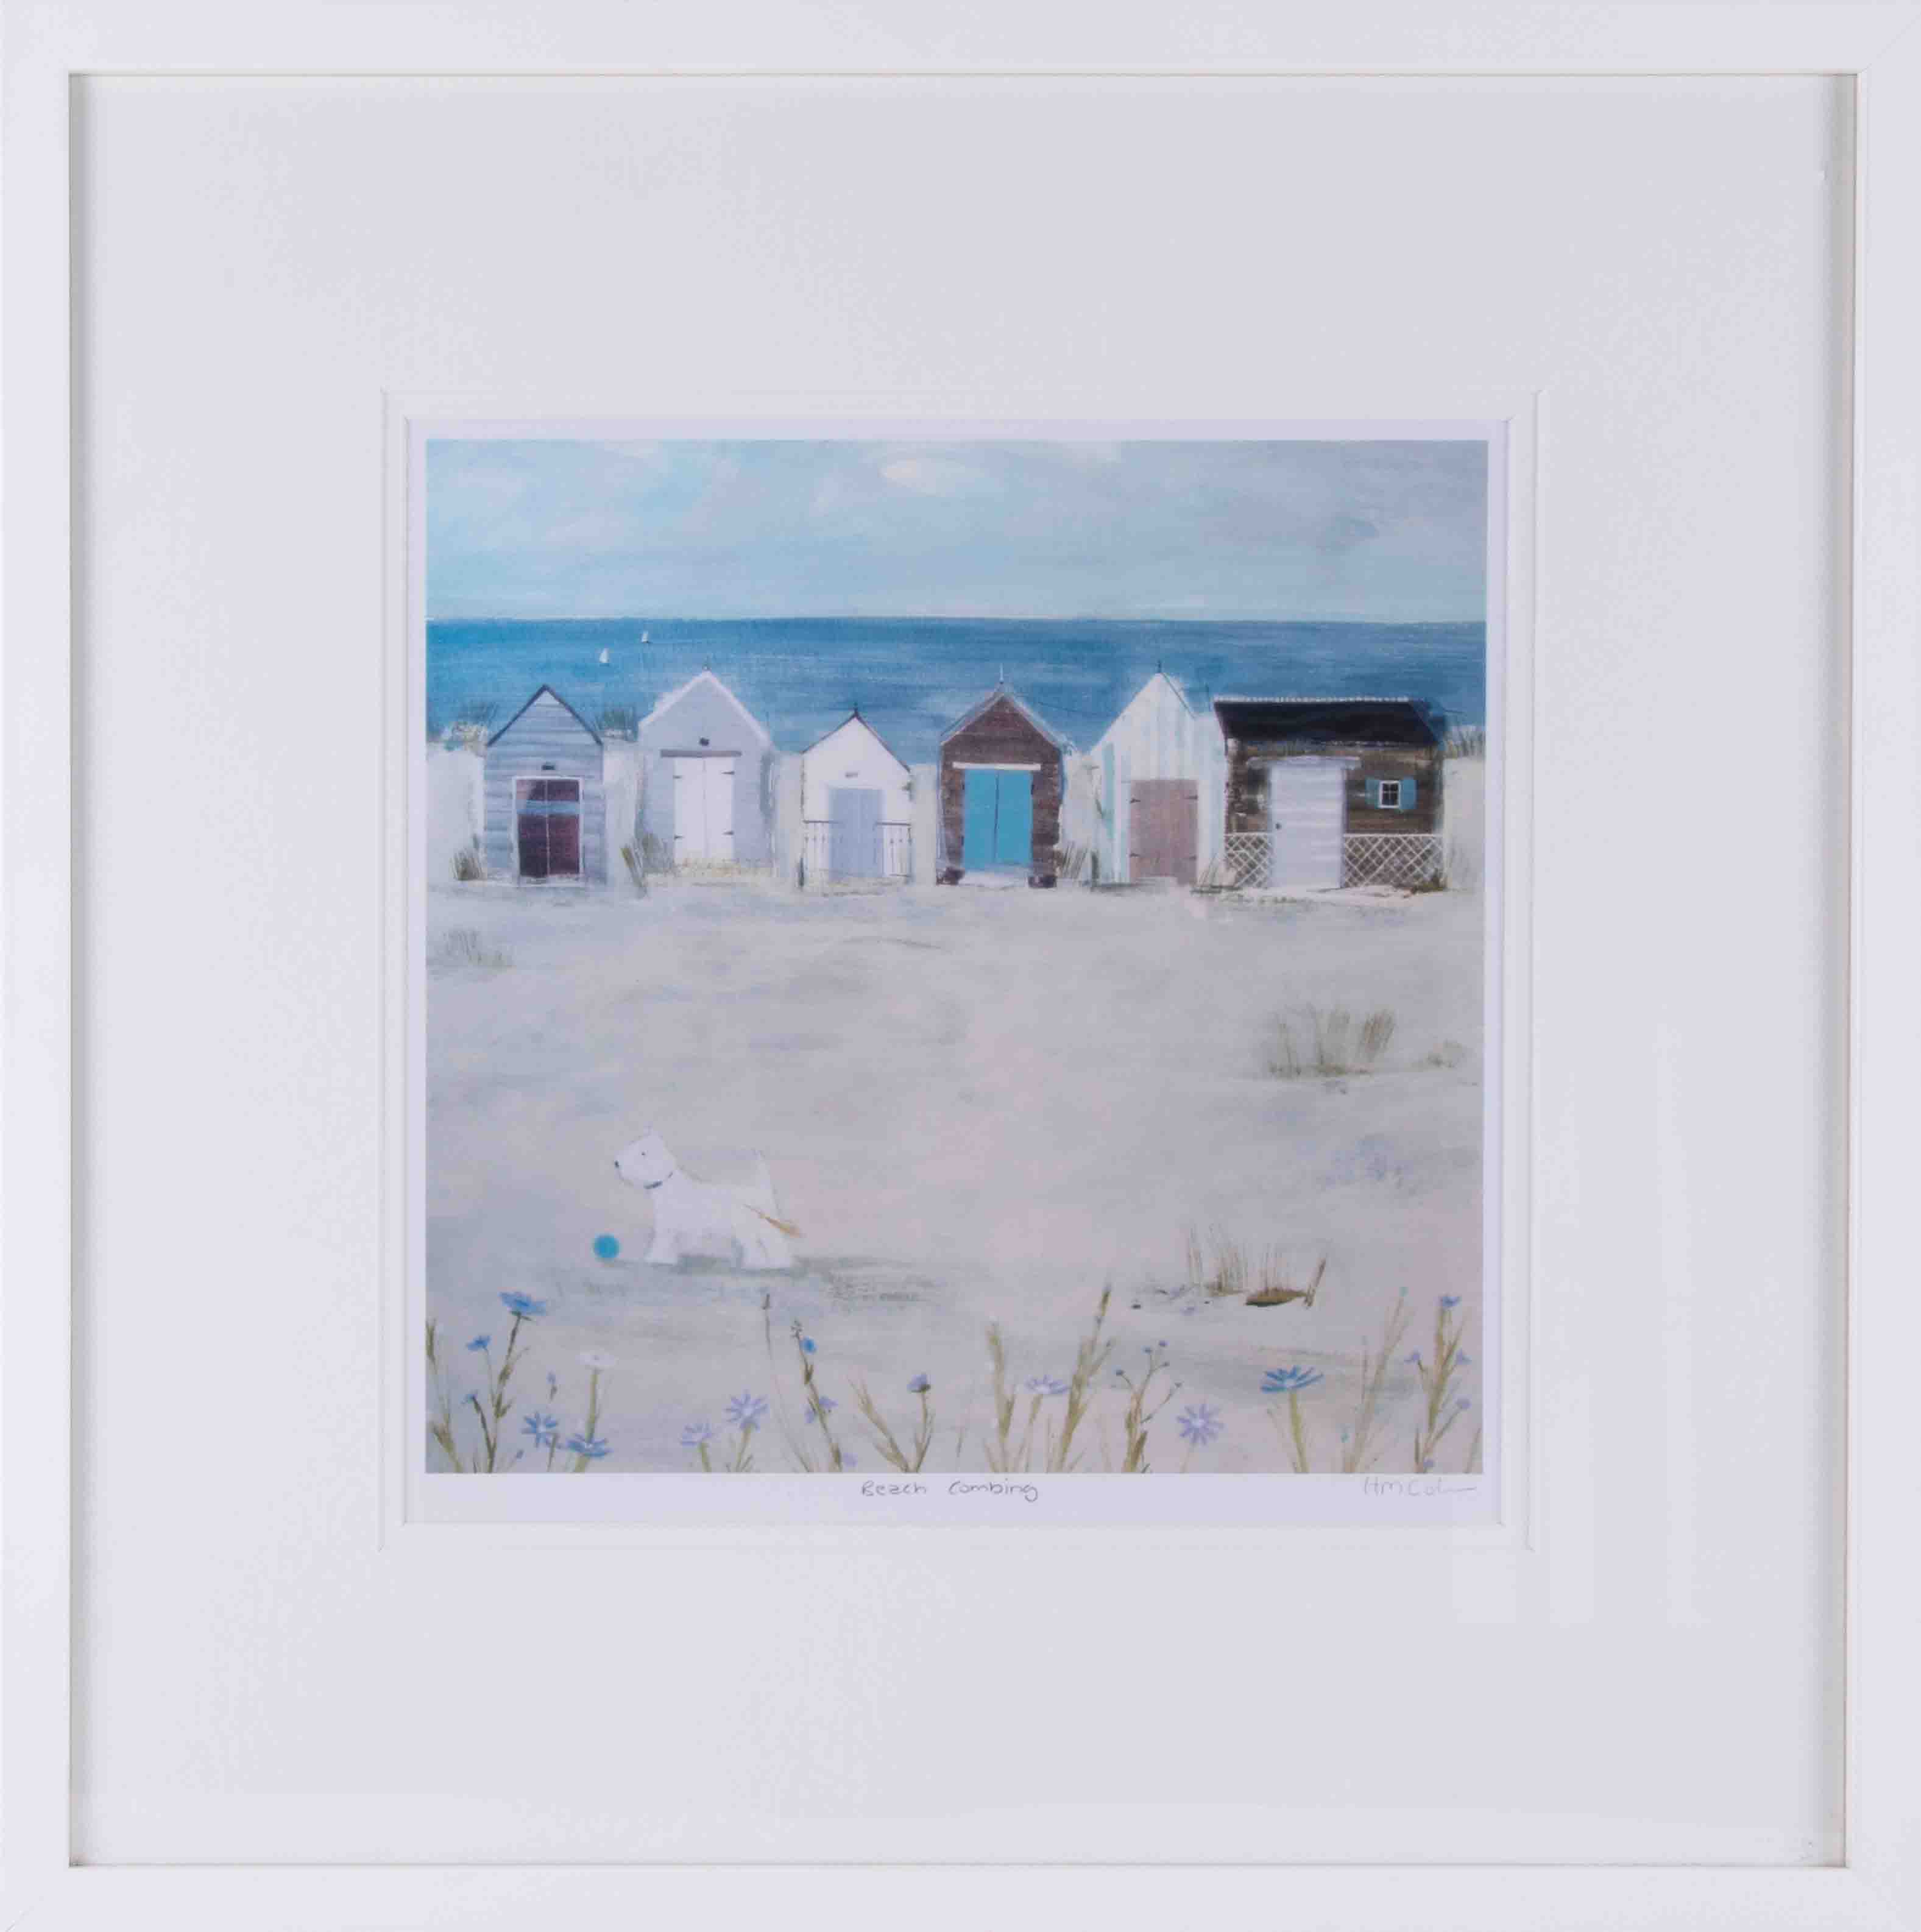 H.M.Col, 'Beach Combing' framed and glazed together with Gill Turner print, 39cm x 39cm, framed - Image 3 of 3